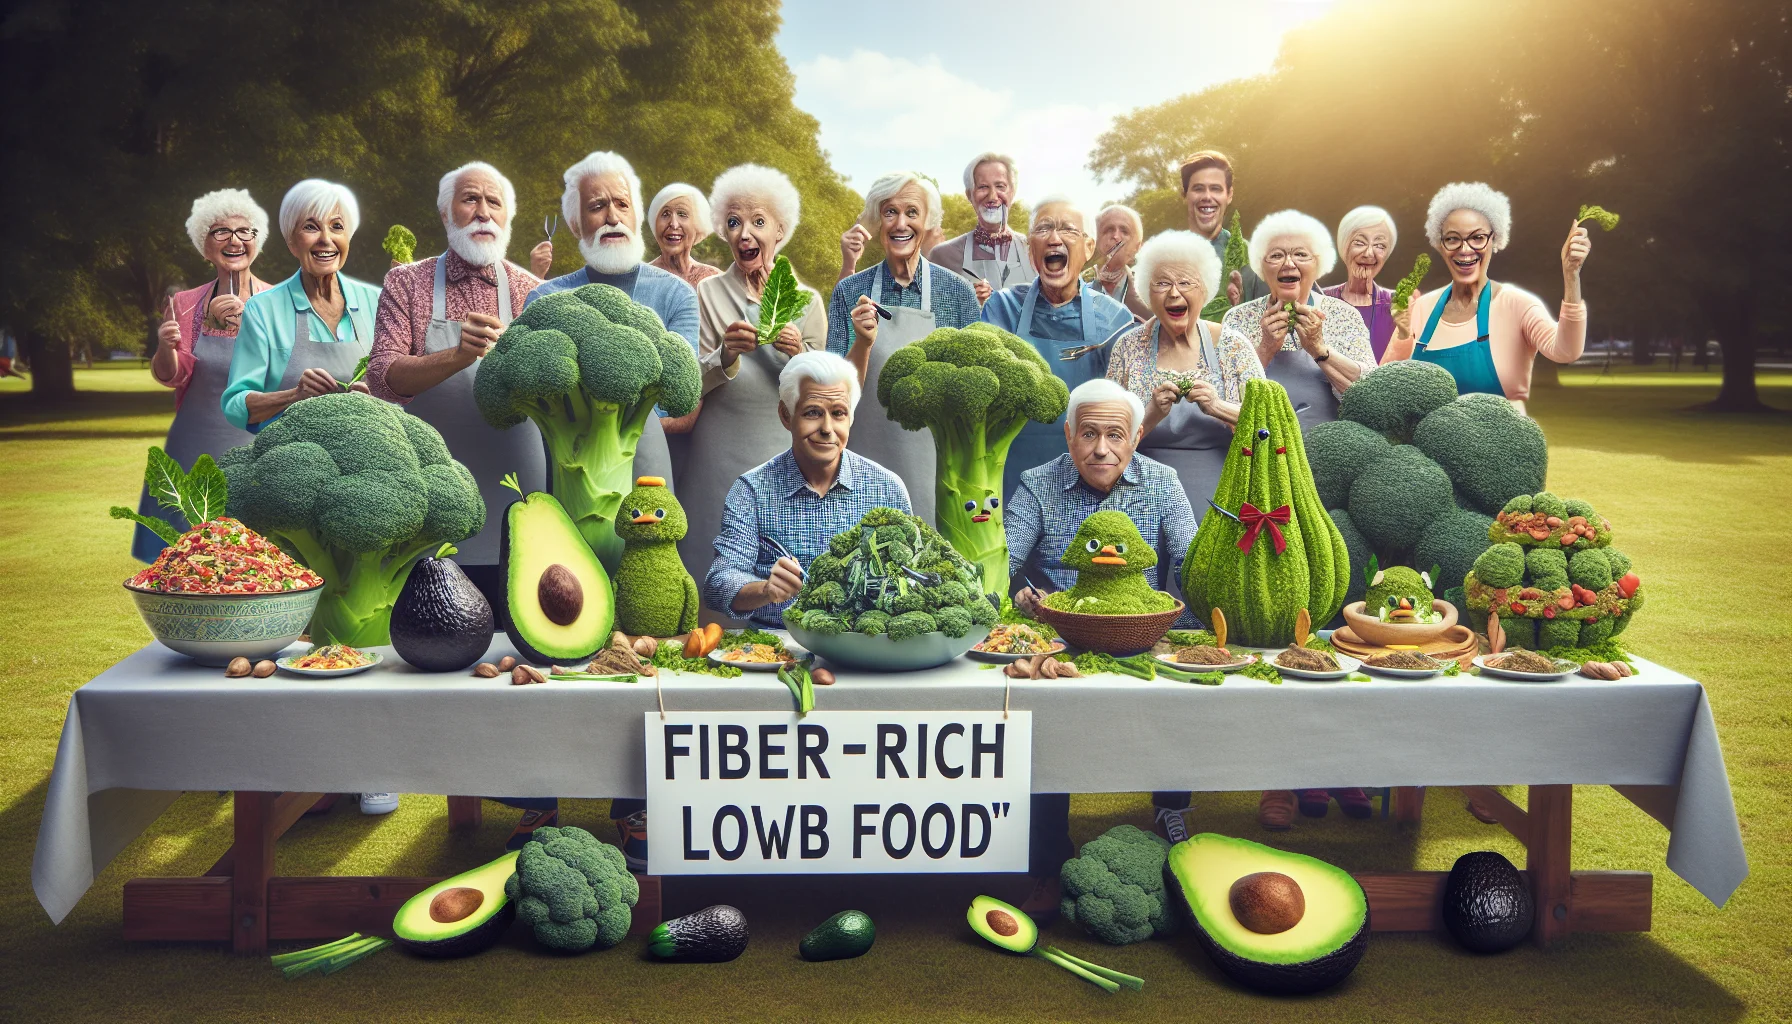 Create a humorous realistic image featuring an elderly group in a unique situation. They're having a grand 'fiber-rich, low-carb food' cook-off in a sunny park. The scene showcases surprising yet healthy foods like avocados shaped like cute animals, broccoli forests, and towering kale salads. The elderly participants, a blend of different descents including Caucasian, Hispanic, and Middle-Eastern women and men, show off their culinary creations with joy and competitive spirit. Their expressions and the vibrant colors of the food make the scenario comedy gold, subtly promoting the importance of high fiber-low carb diets for the elderly.